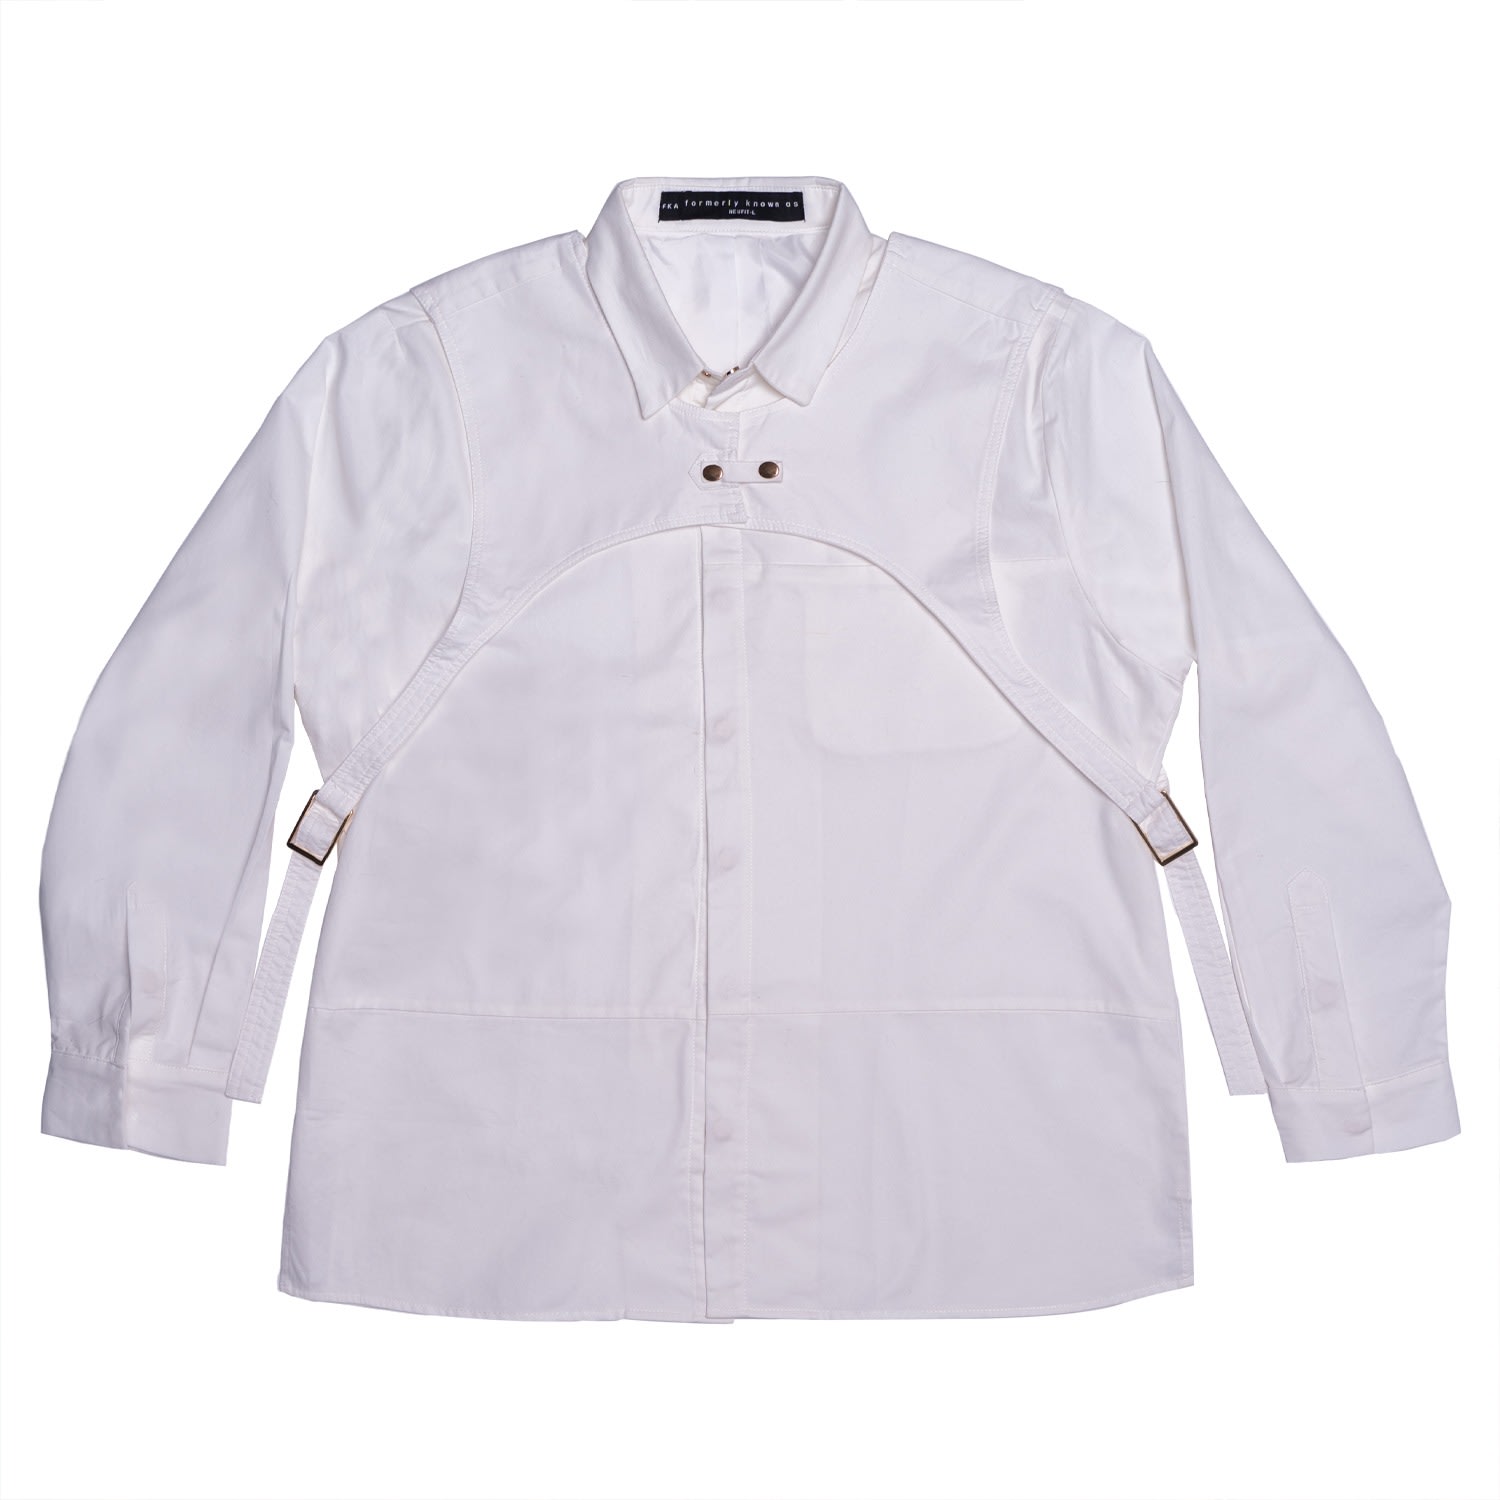 Men’s The White Shirt Large Formerly Known as